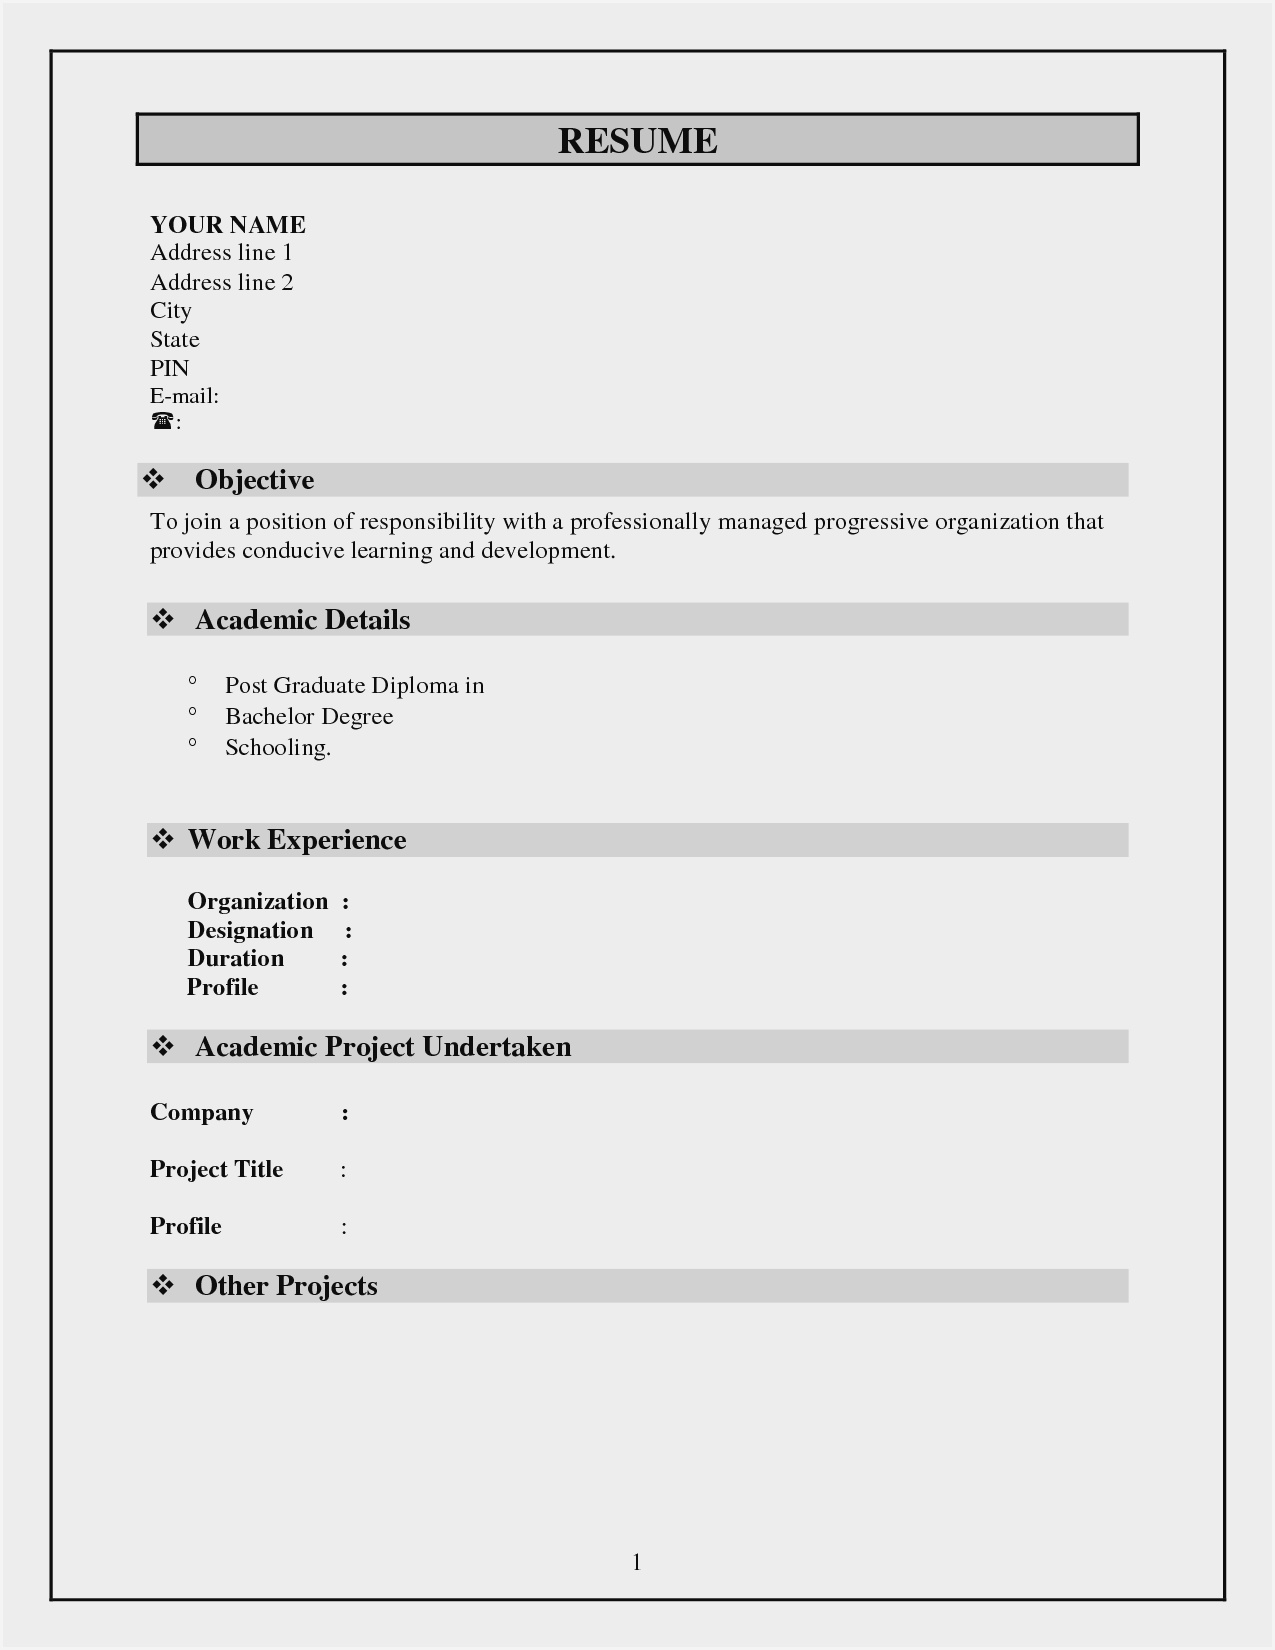 Resume Template Word Download Malaysia – Resume Sample Within Job Application Template Word